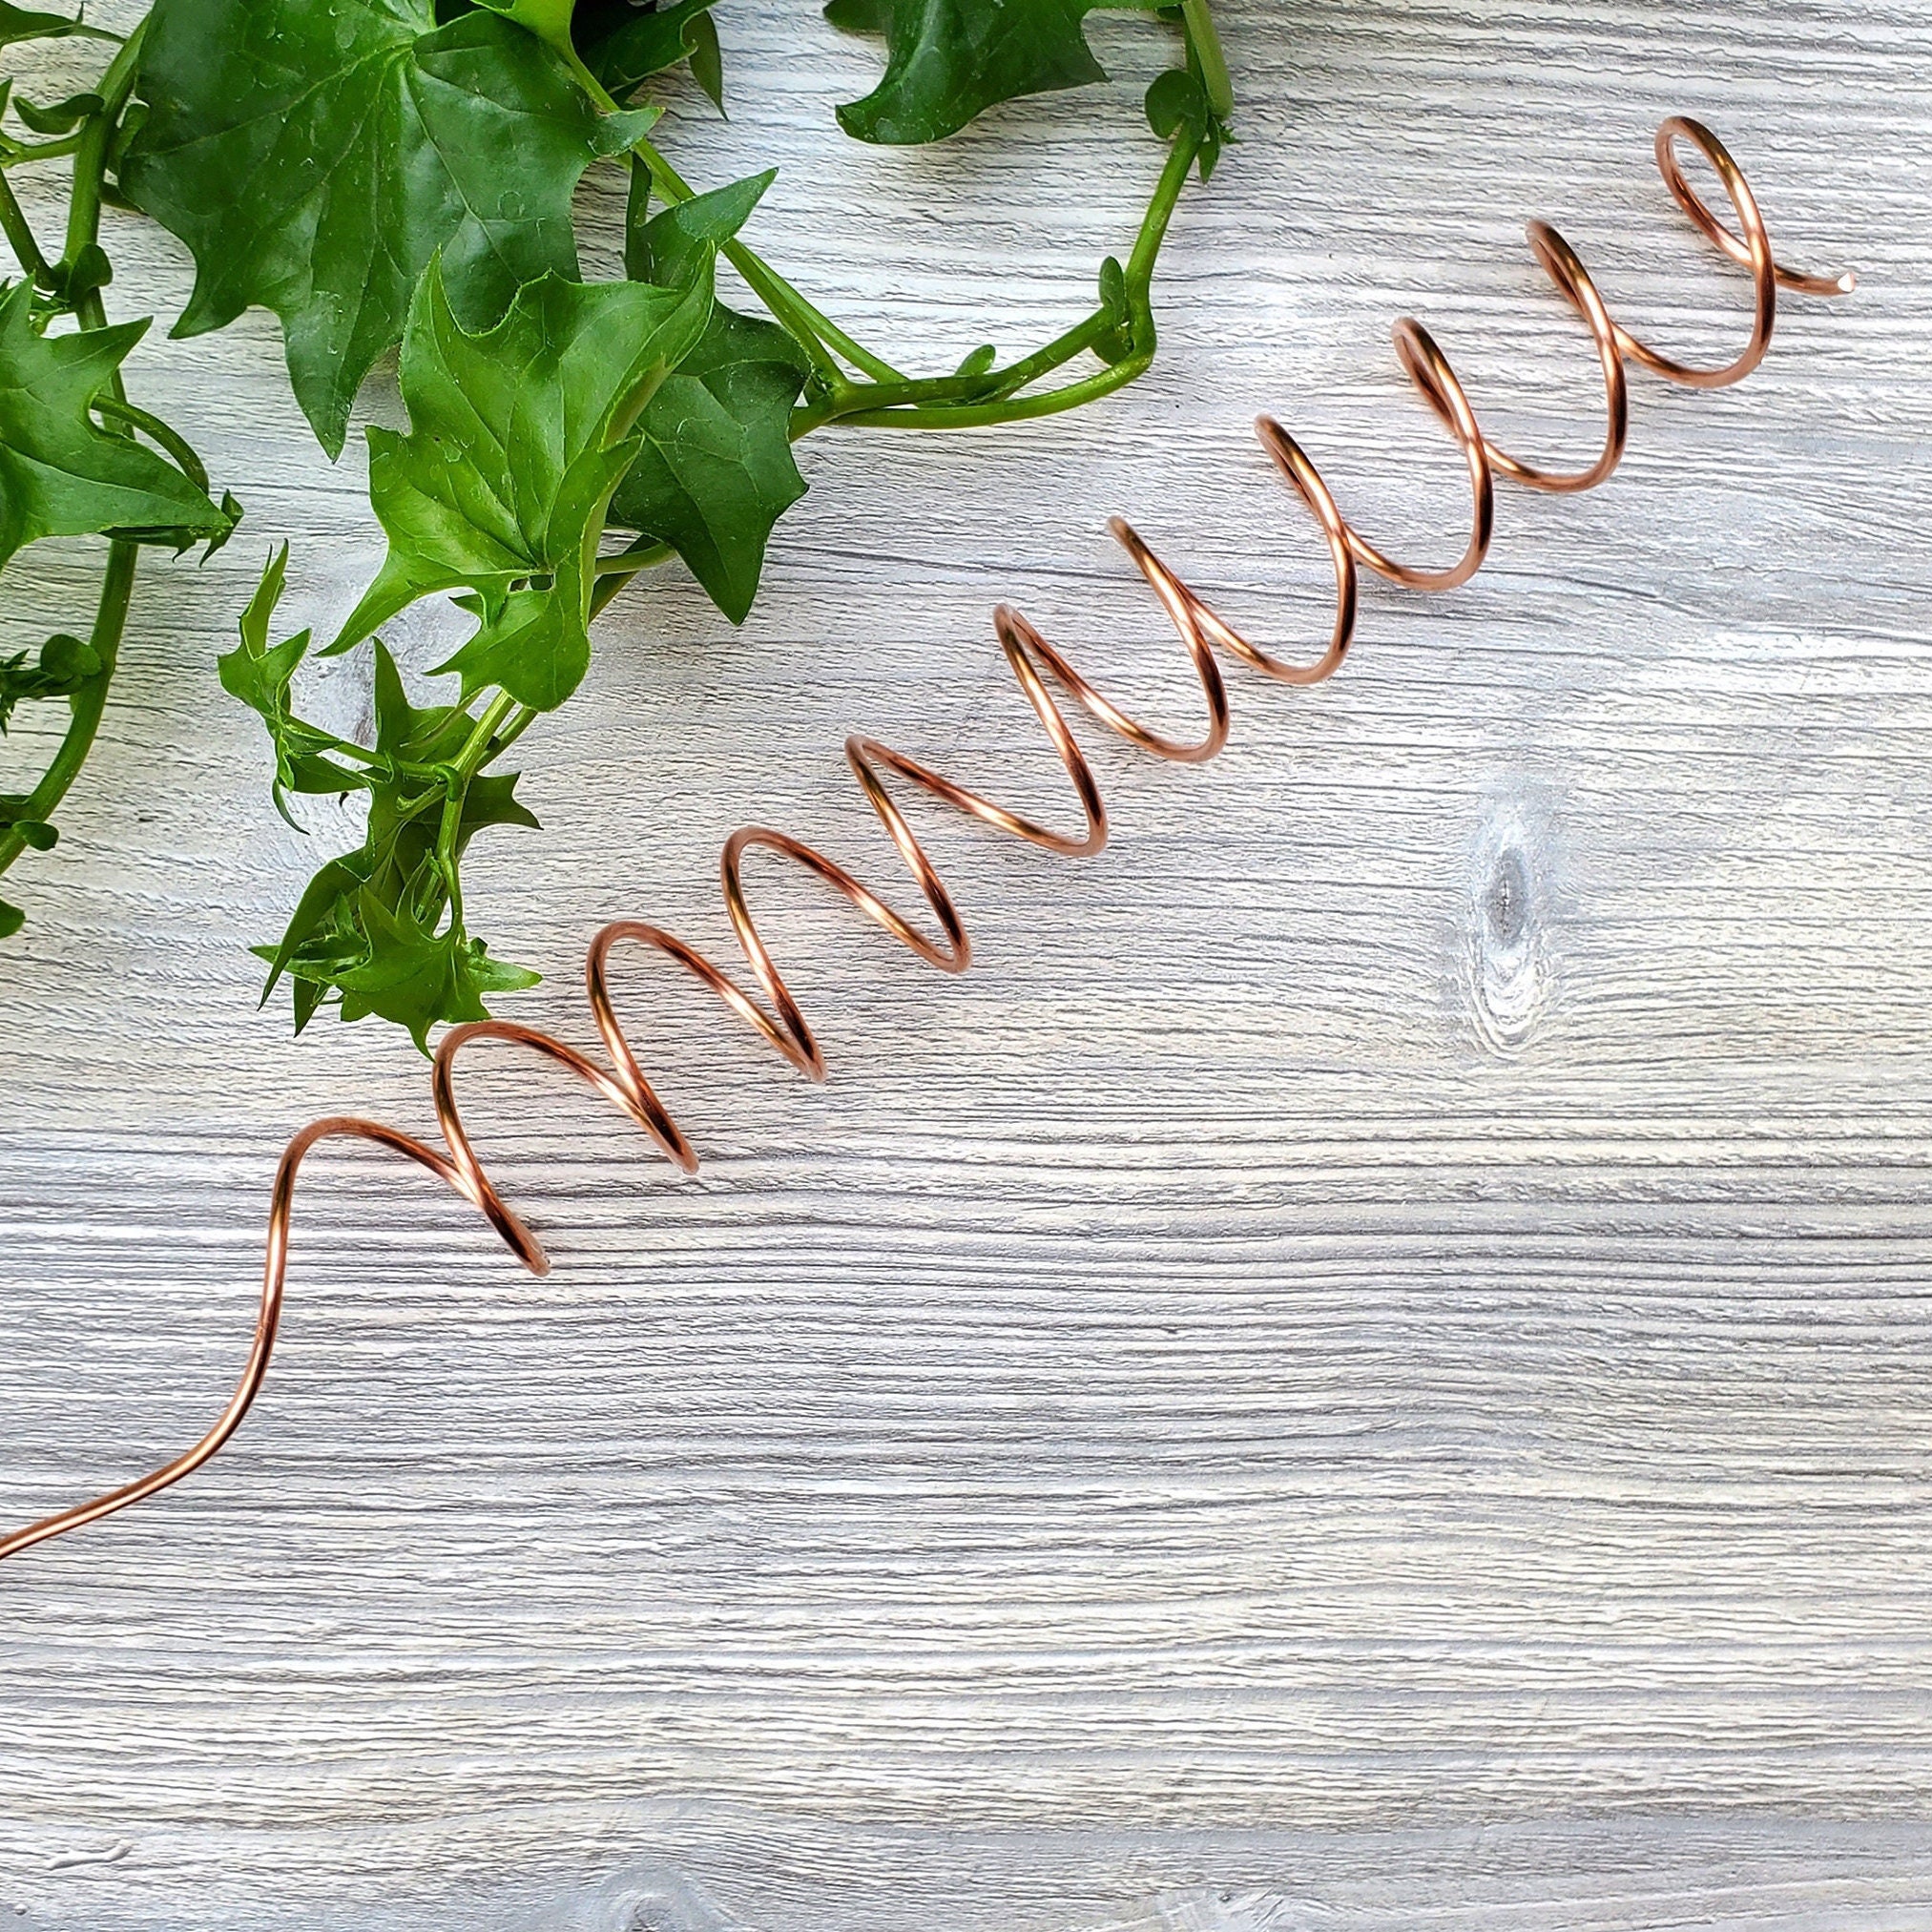 What Is Electroculture Gardening, And Is It Worth A Try?